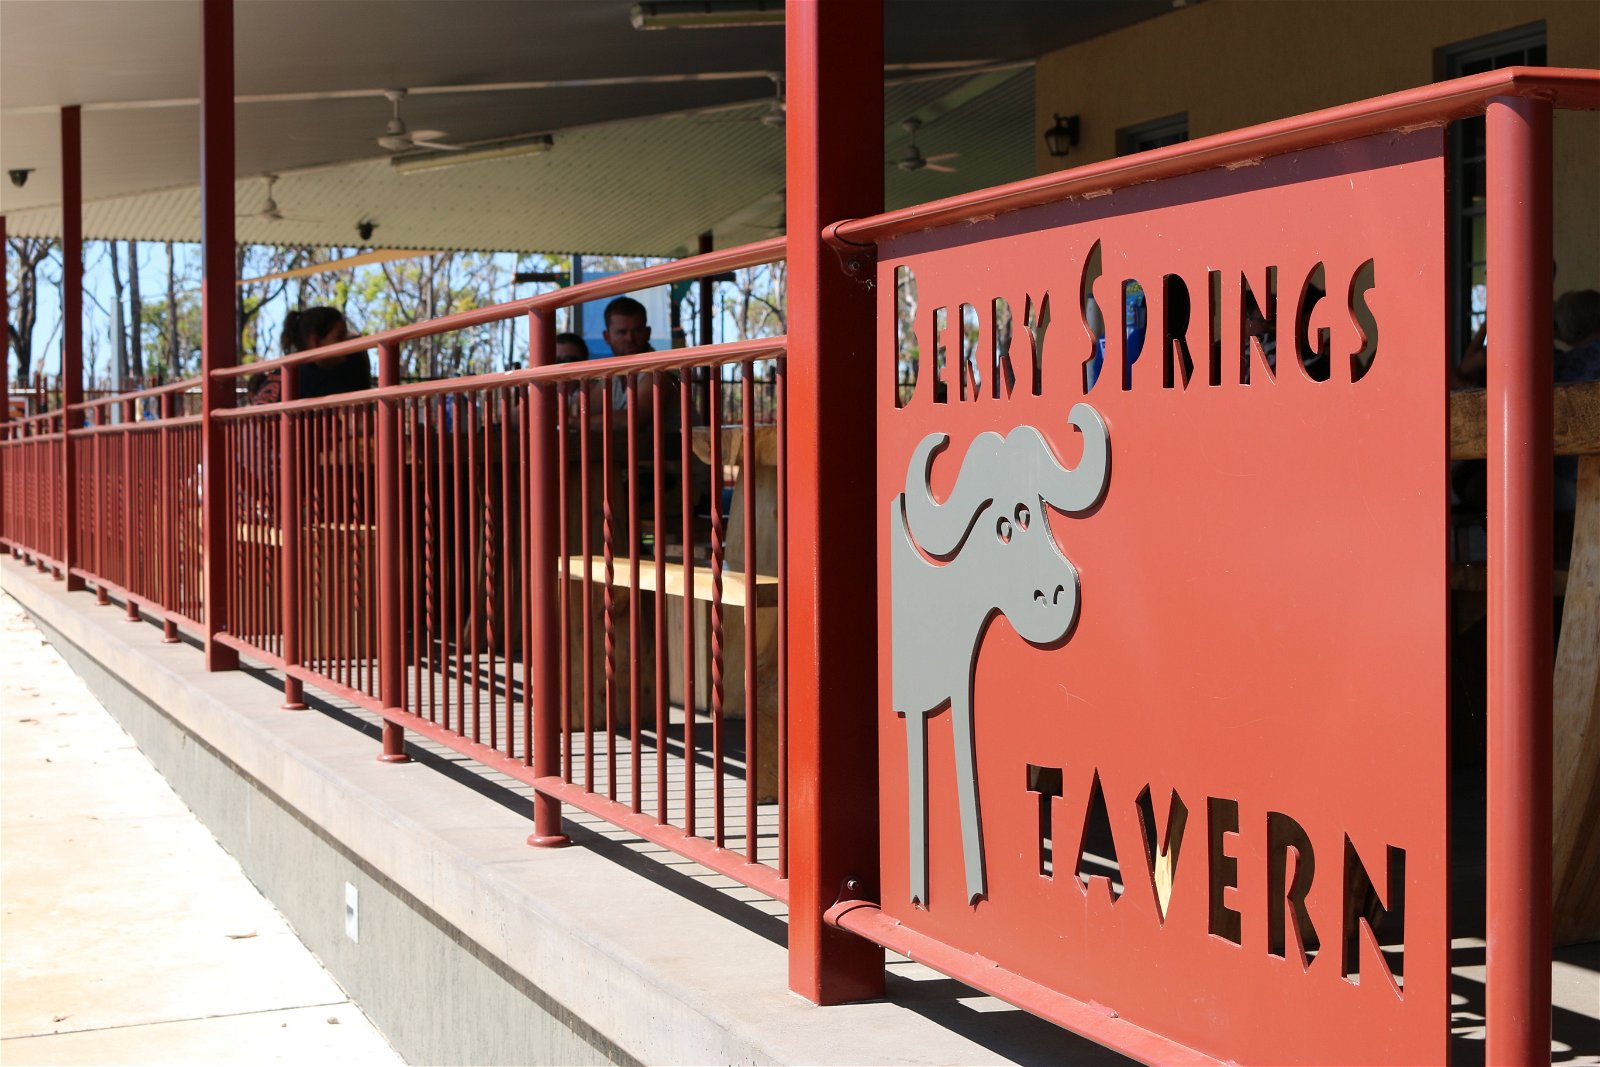 Berry Springs Tavern - Food Delivery Shop